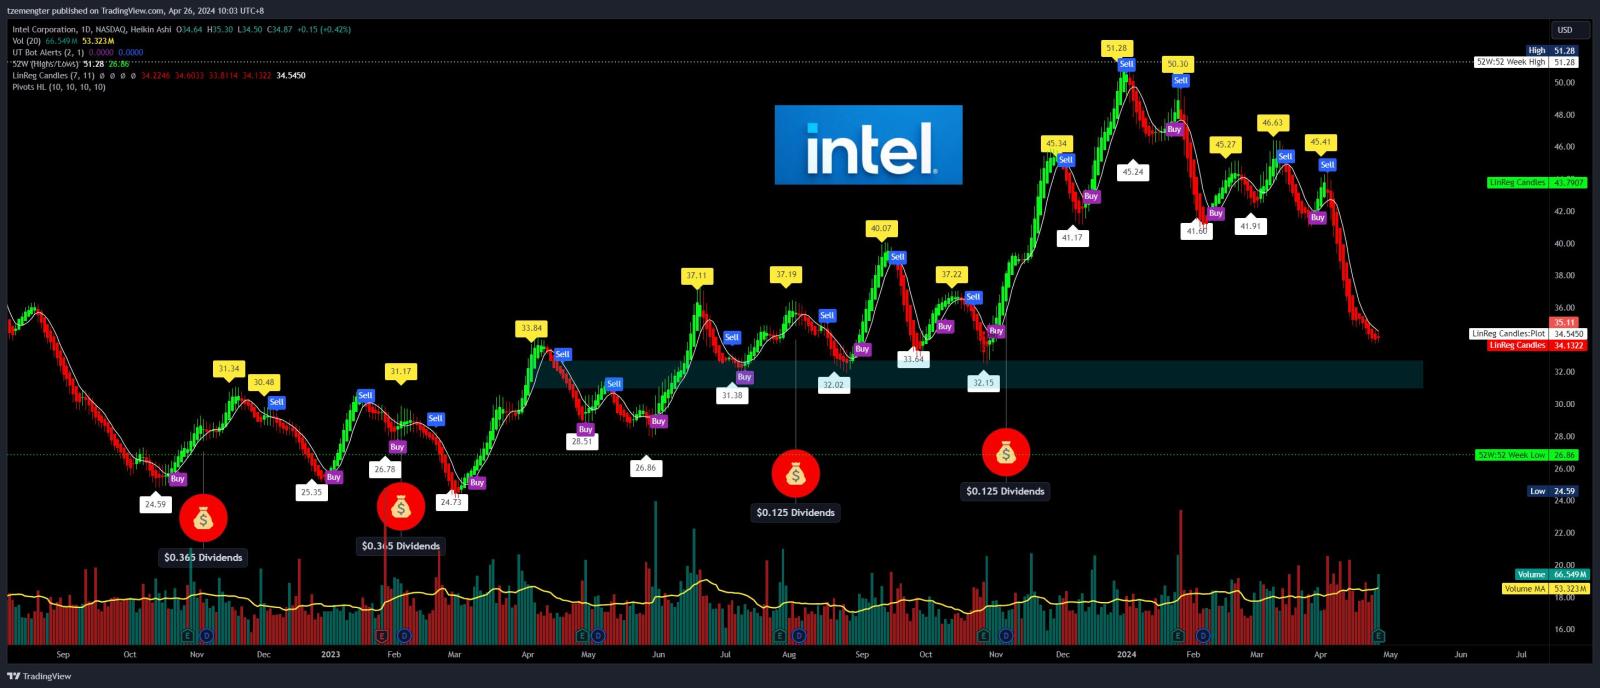 $Intel (INTC.US)$ results out, post market chui..